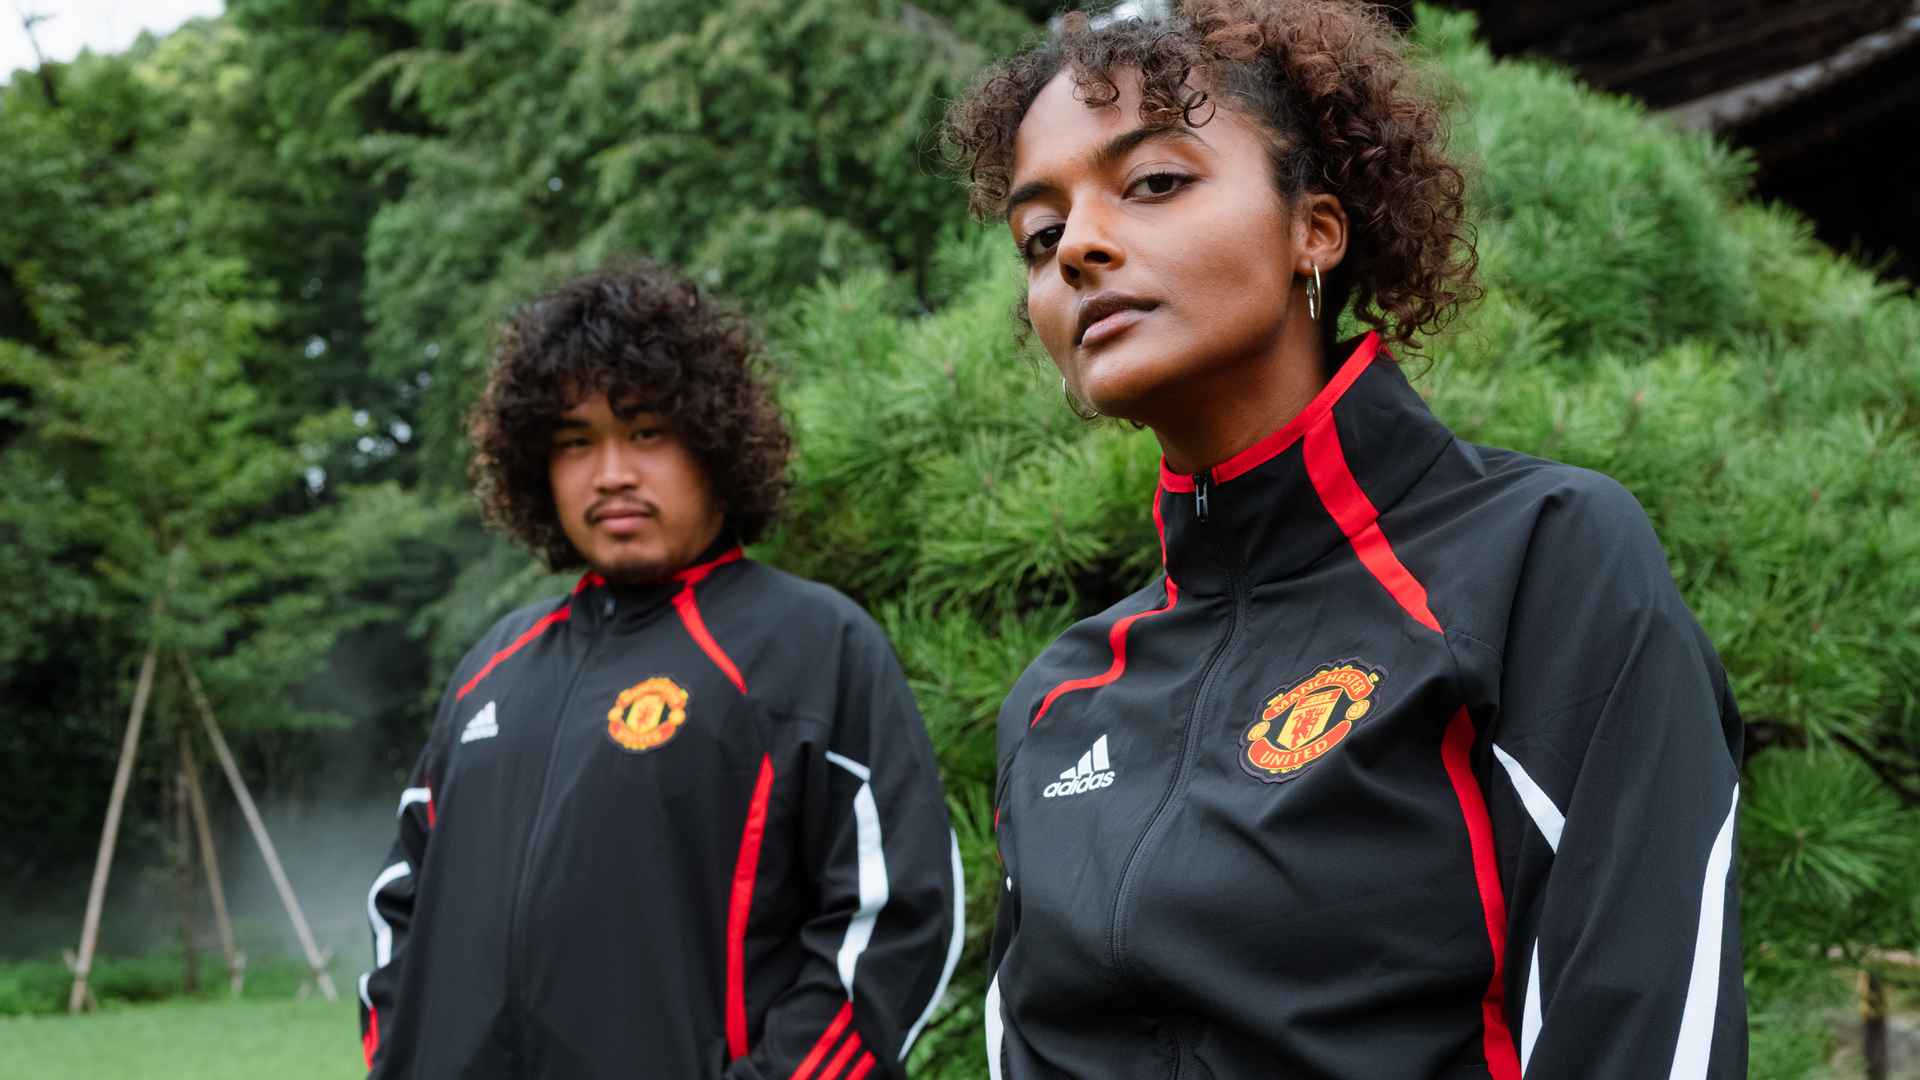 Manchester United and adidas football launch the Teamgeist collection